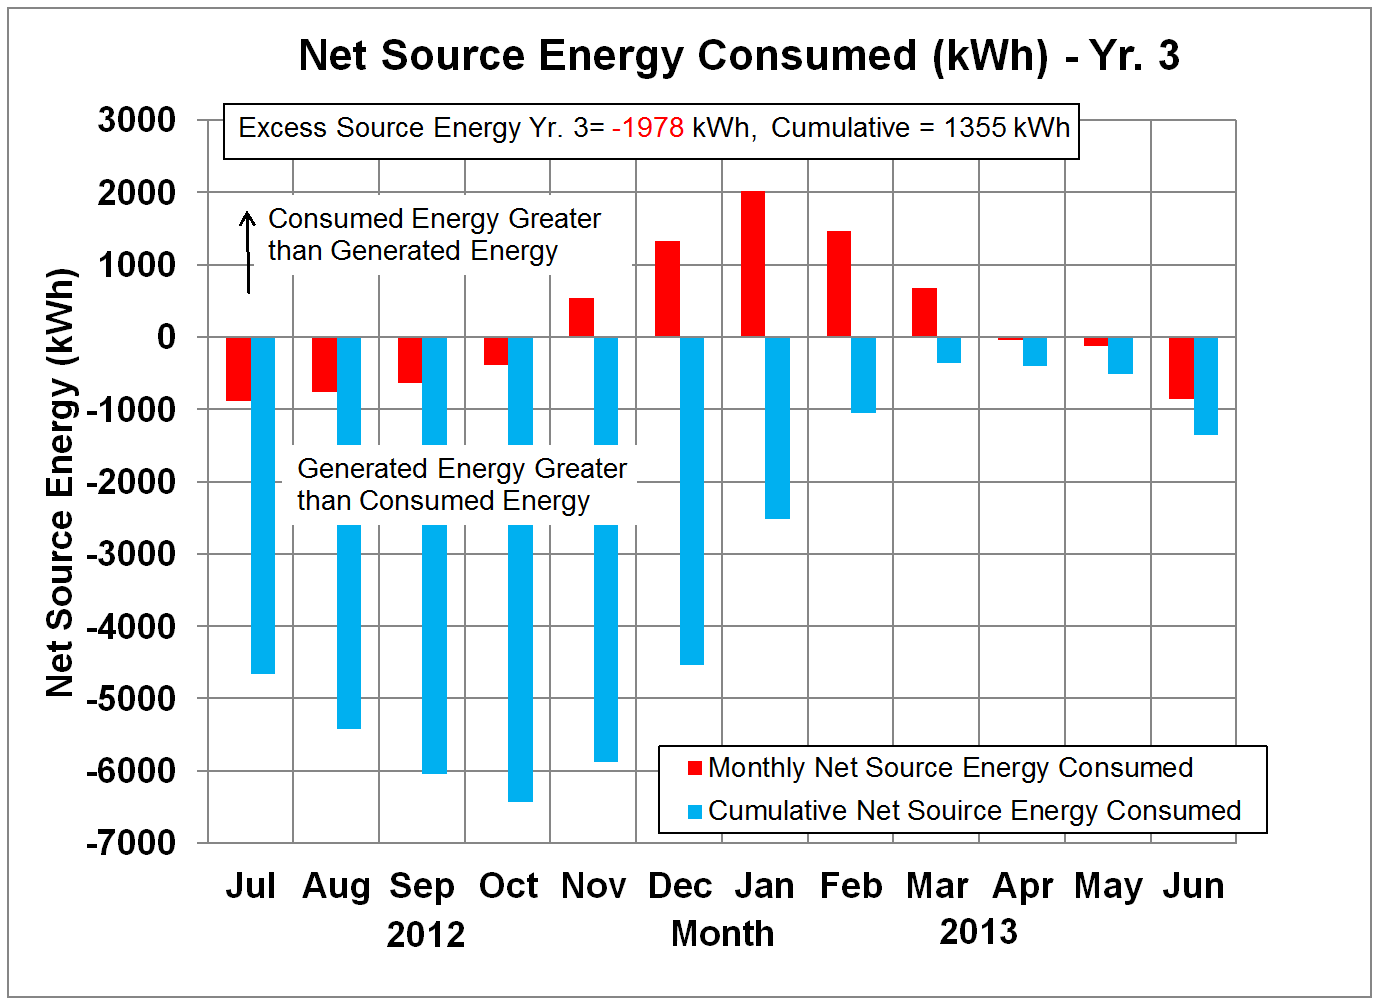 Net Source Energy in kWh - Yr. 3